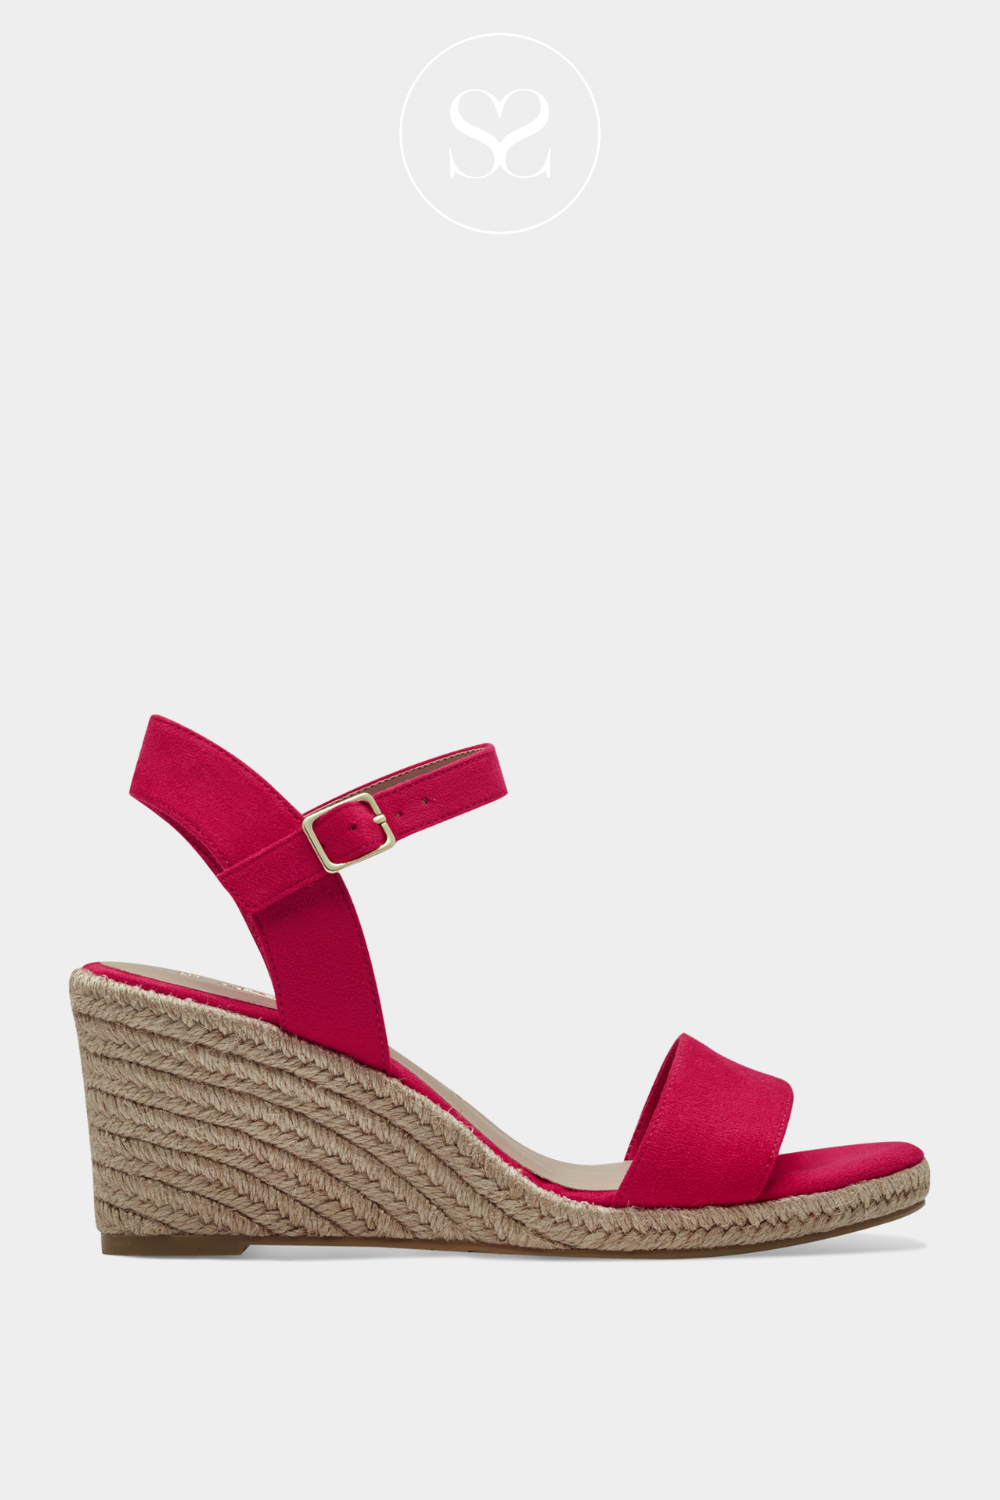 TAMARIS 1-28300-42 PINK SUEDE WEDGE SANDALS WITH ADJUSTABLE ANKLE STRAP